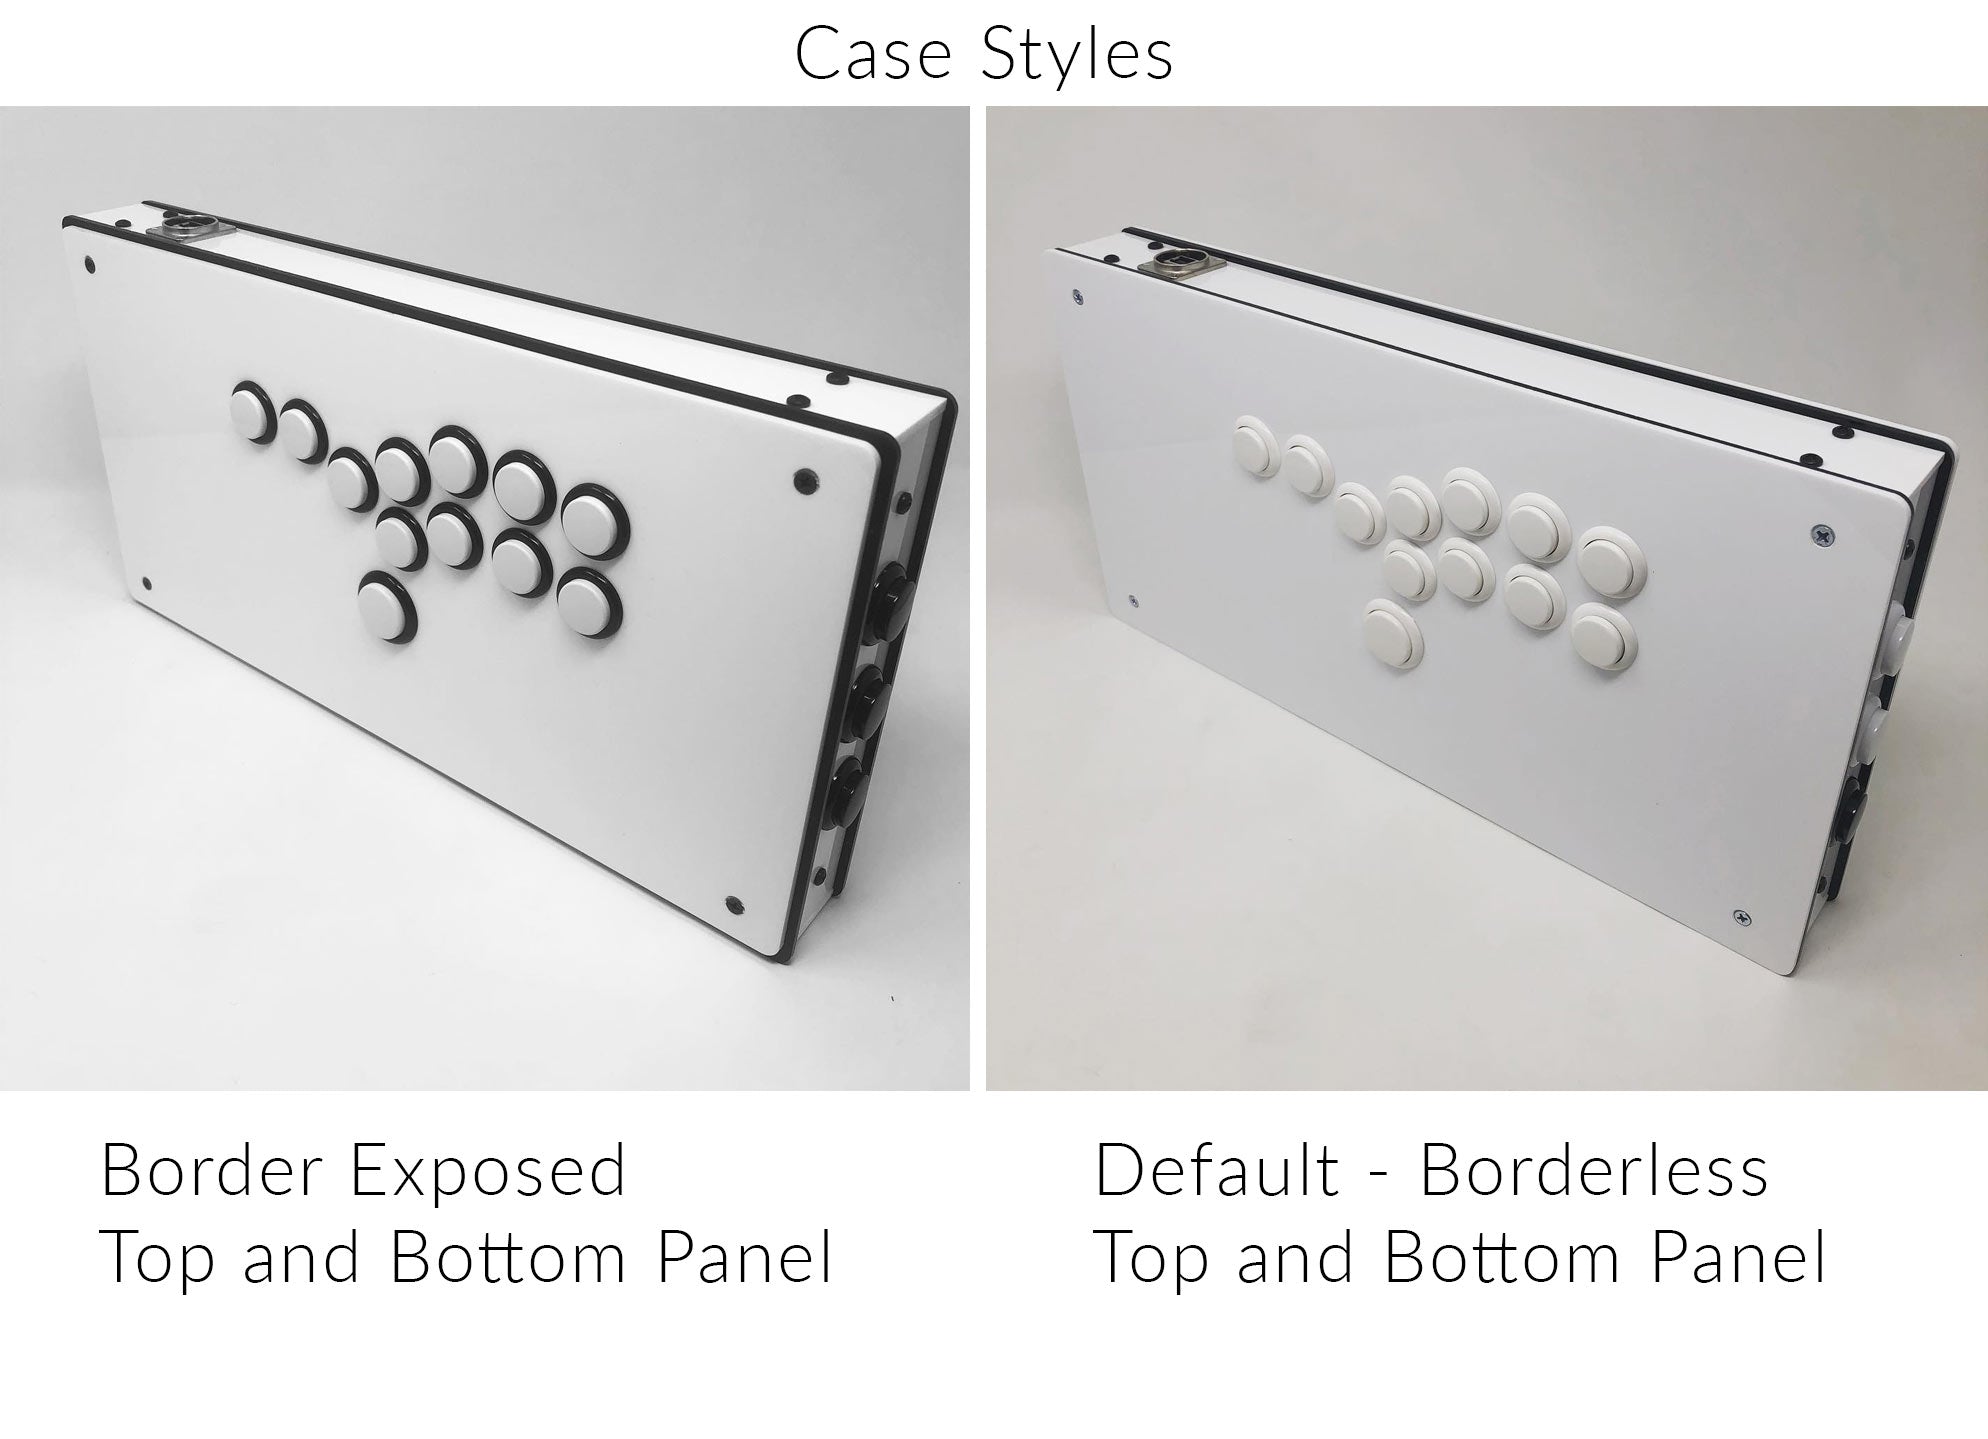 Base Model - Fast Checkout - High Tier Case - Stickless Enclosures - Add Art in Options